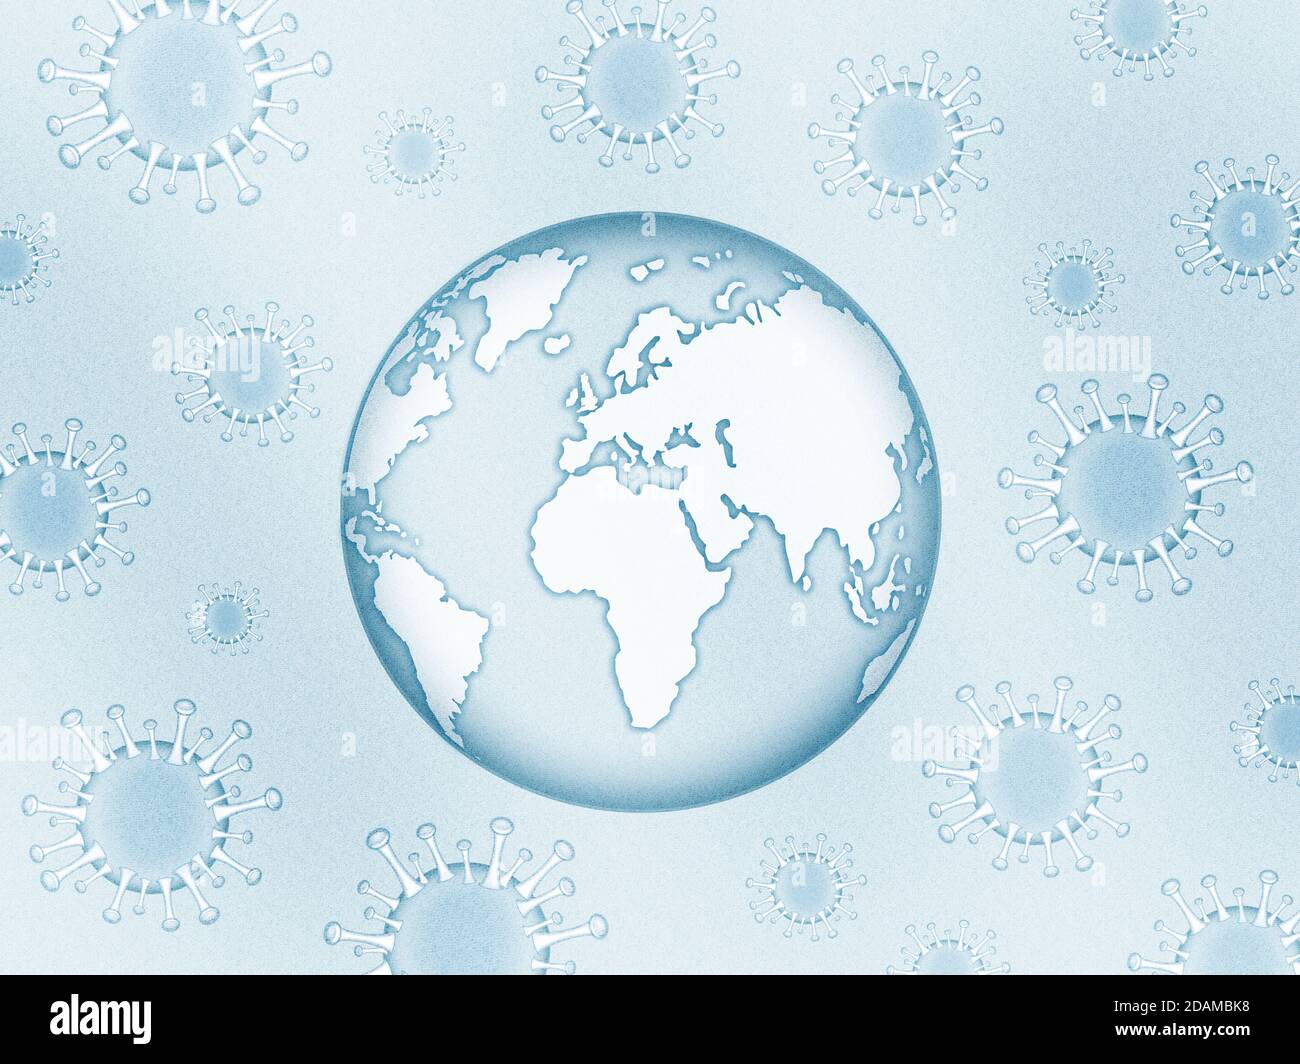 Earth with covid-19 viruses, illustration. Stock Photo